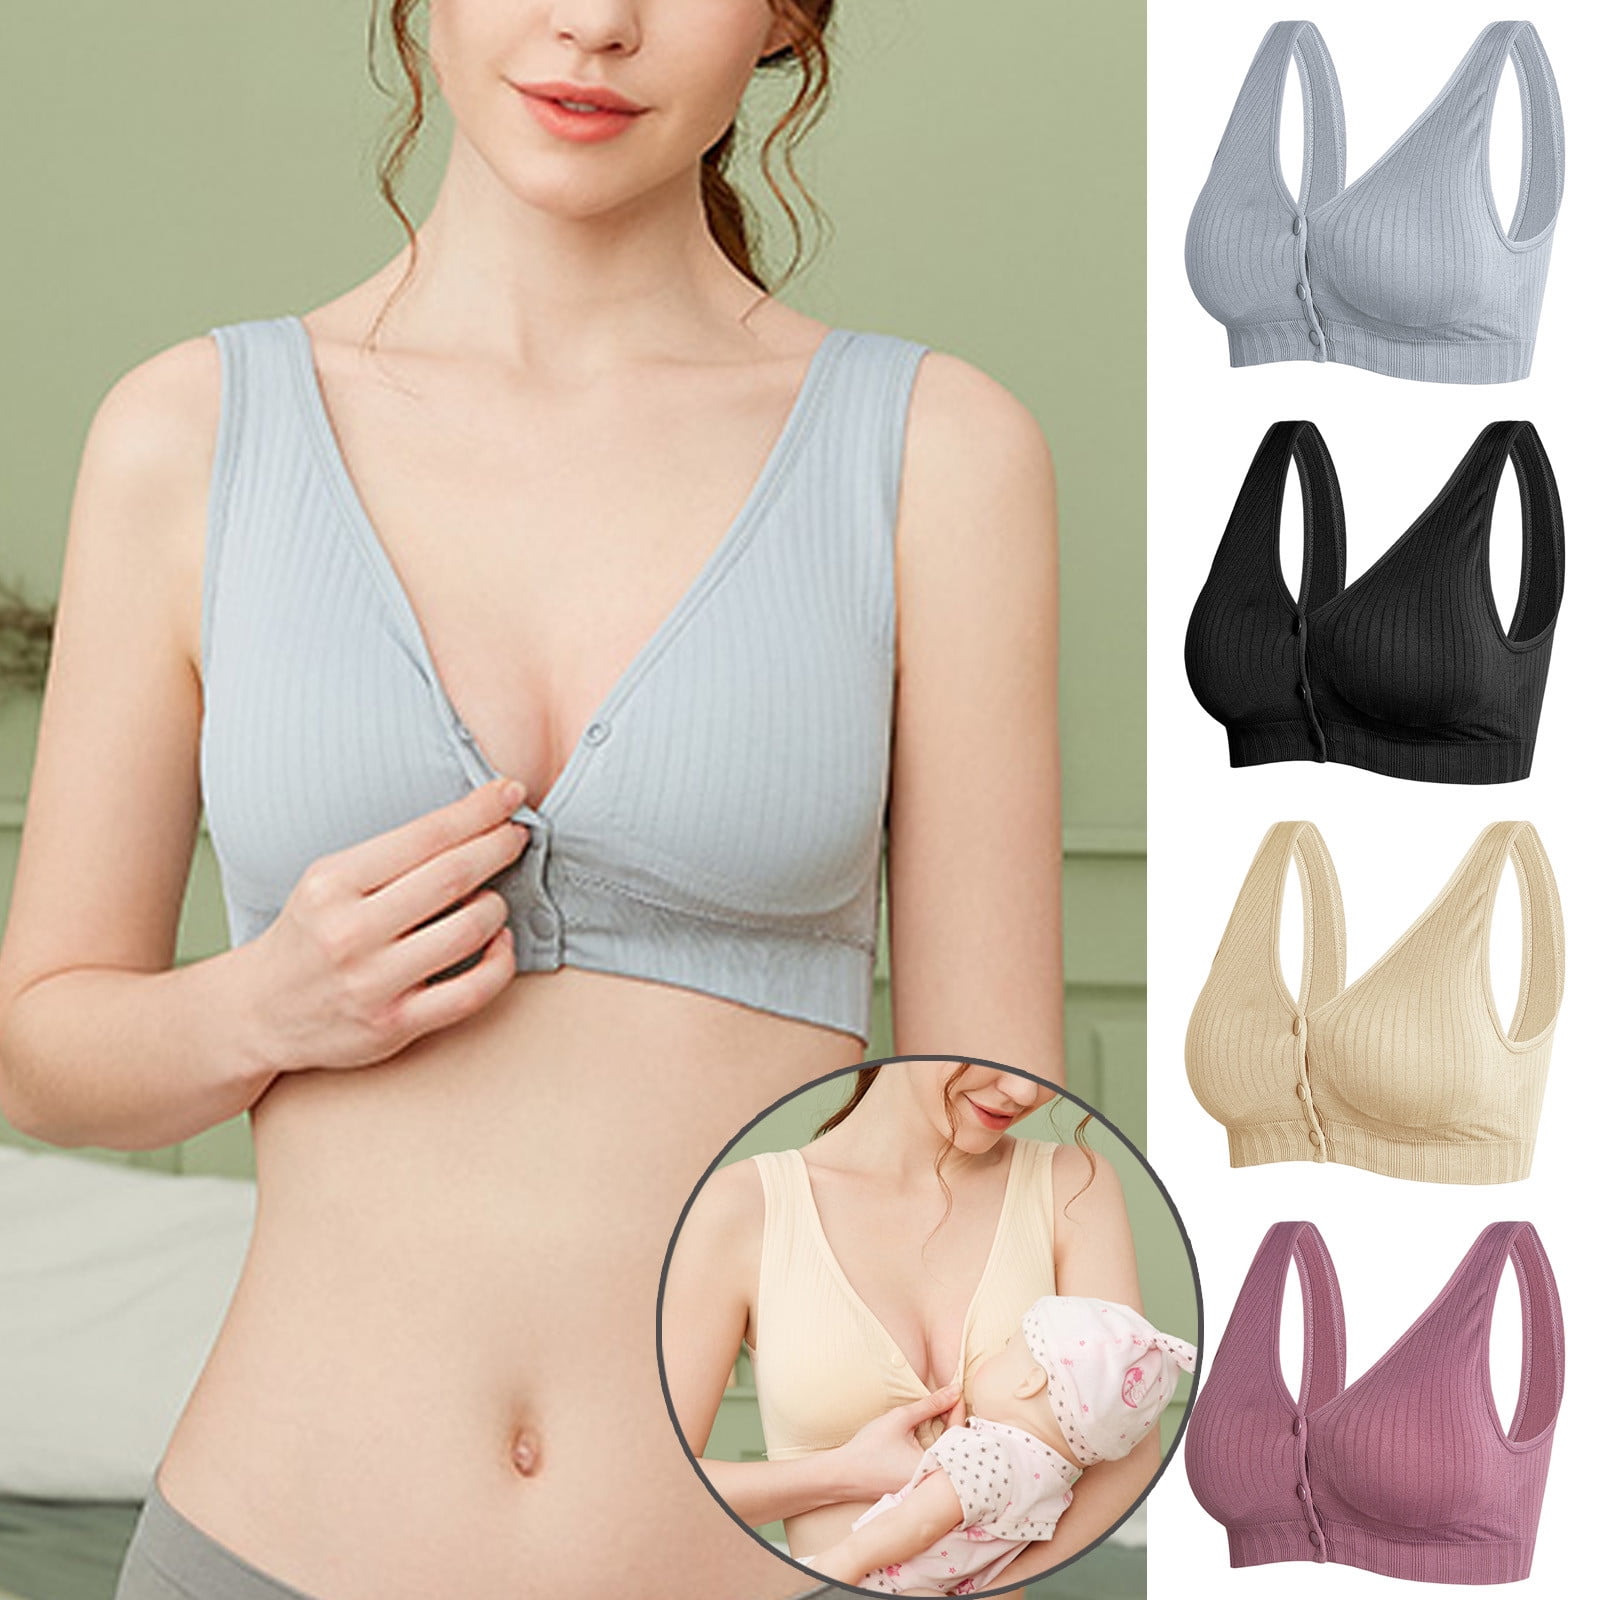  Nizo Wear Solace Comfort Nursing Bra with Healing Pocket and  Removable Molded Pad (36DDD) : Clothing, Shoes & Jewelry